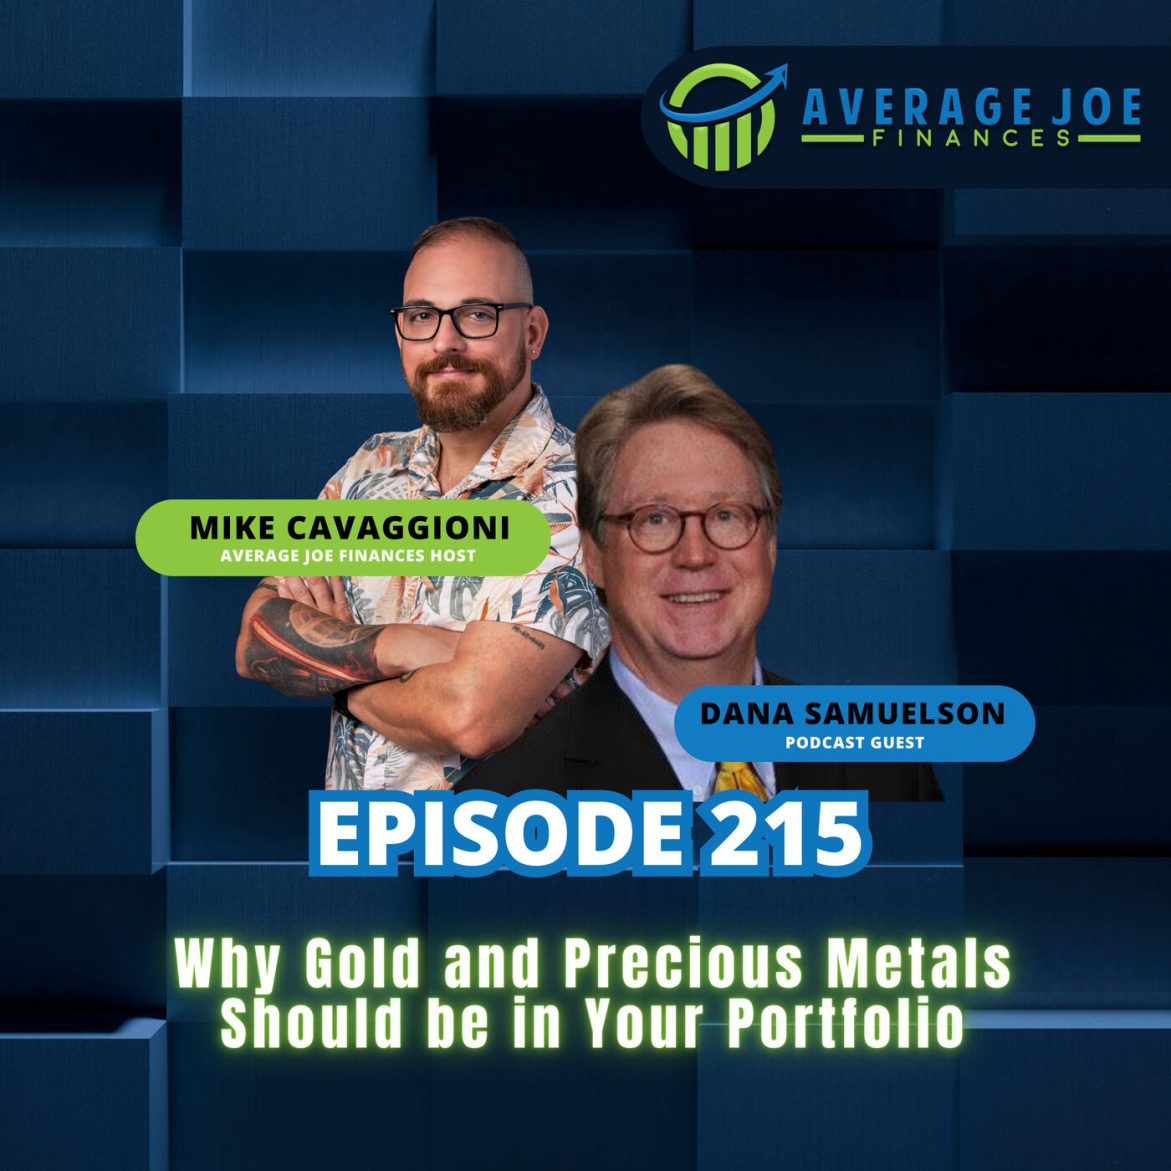 Black Podcasting - 215. Why Gold and Precious Metals Should be in Your Portfolio with Dana Samuelson